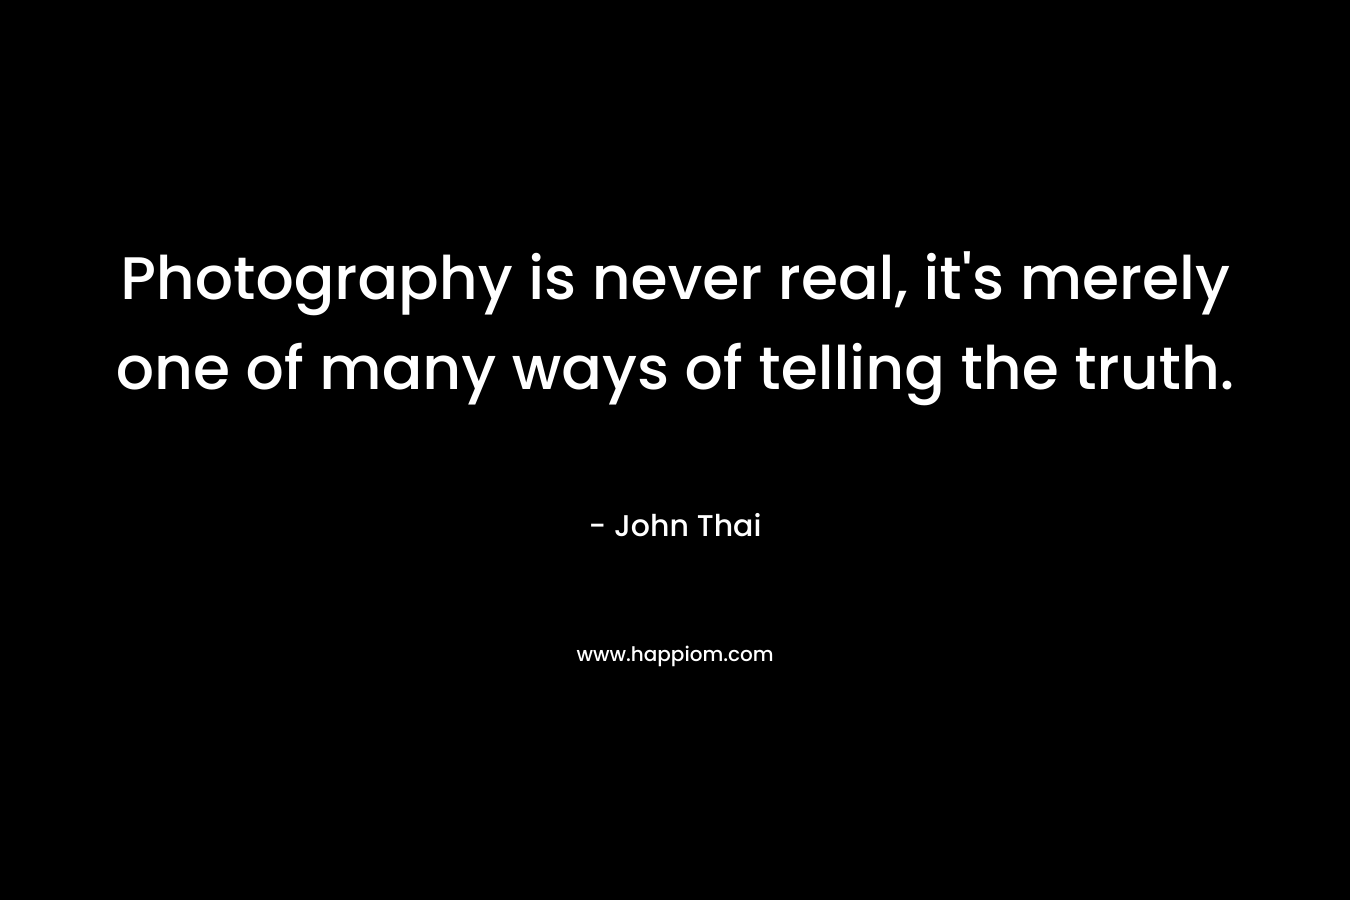 Photography is never real, it’s merely one of many ways of telling the truth. – John Thai